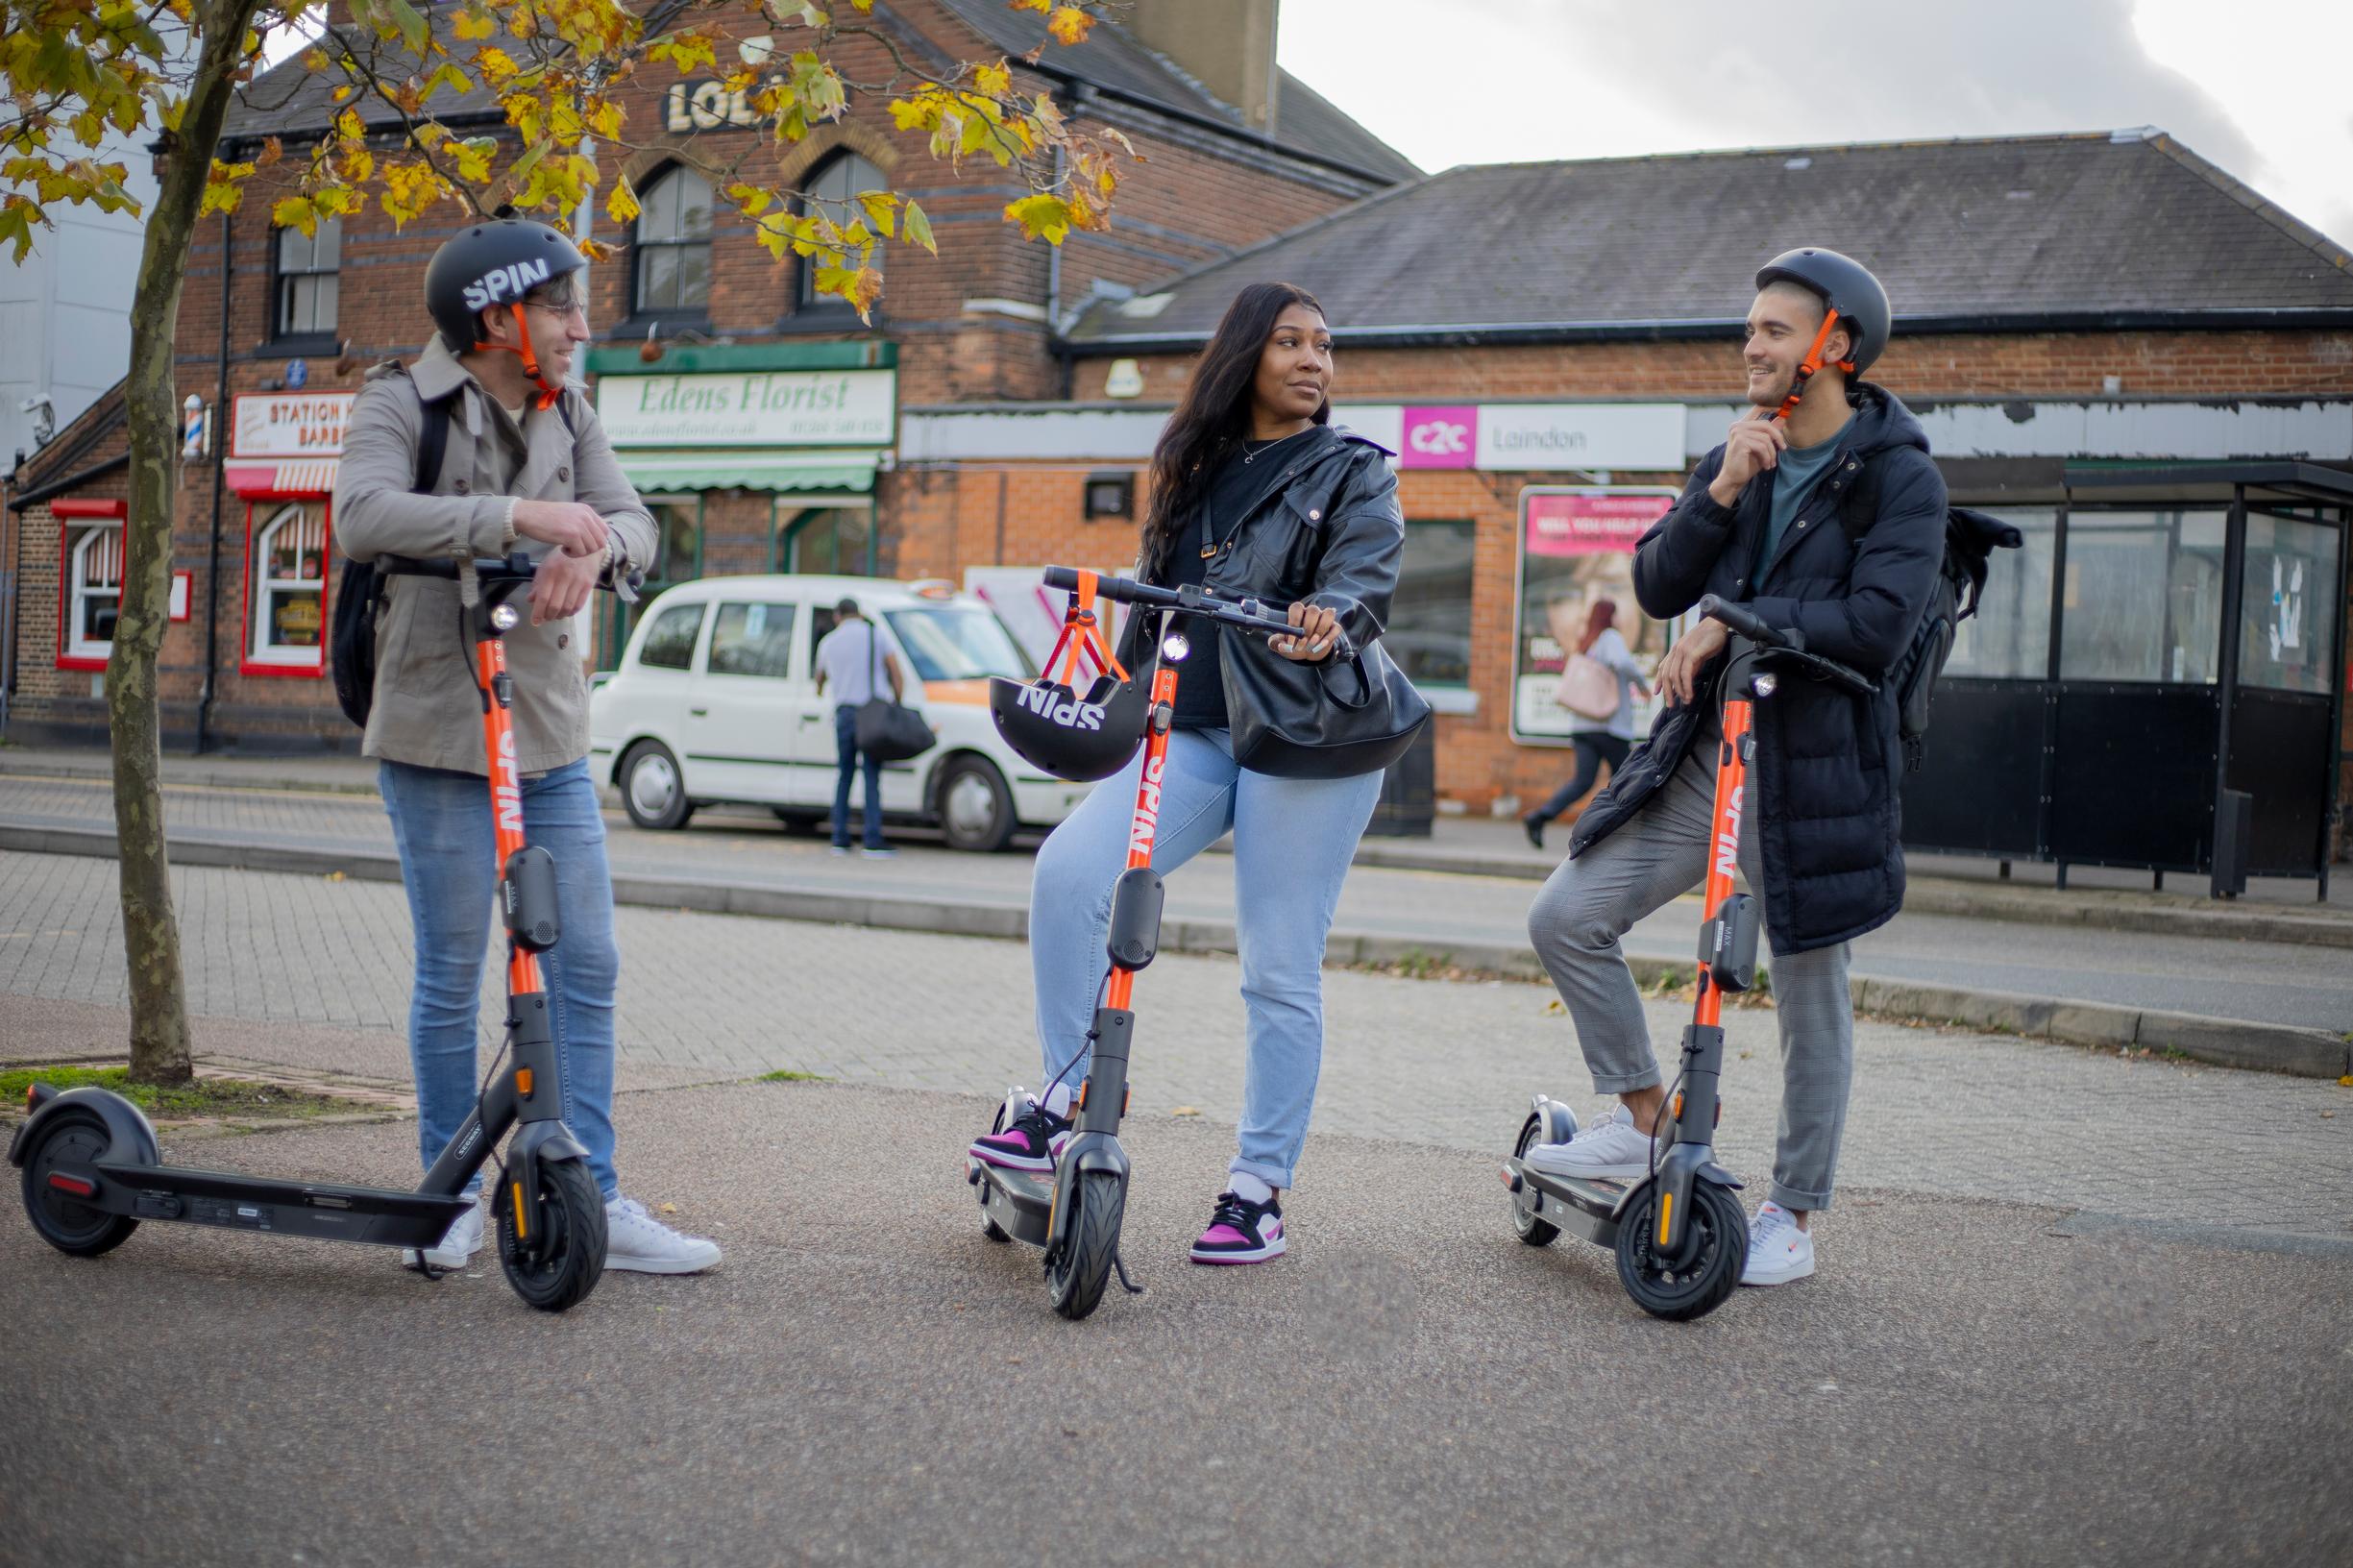 Fifty e-scooters are available for hire in Basildon, Essex